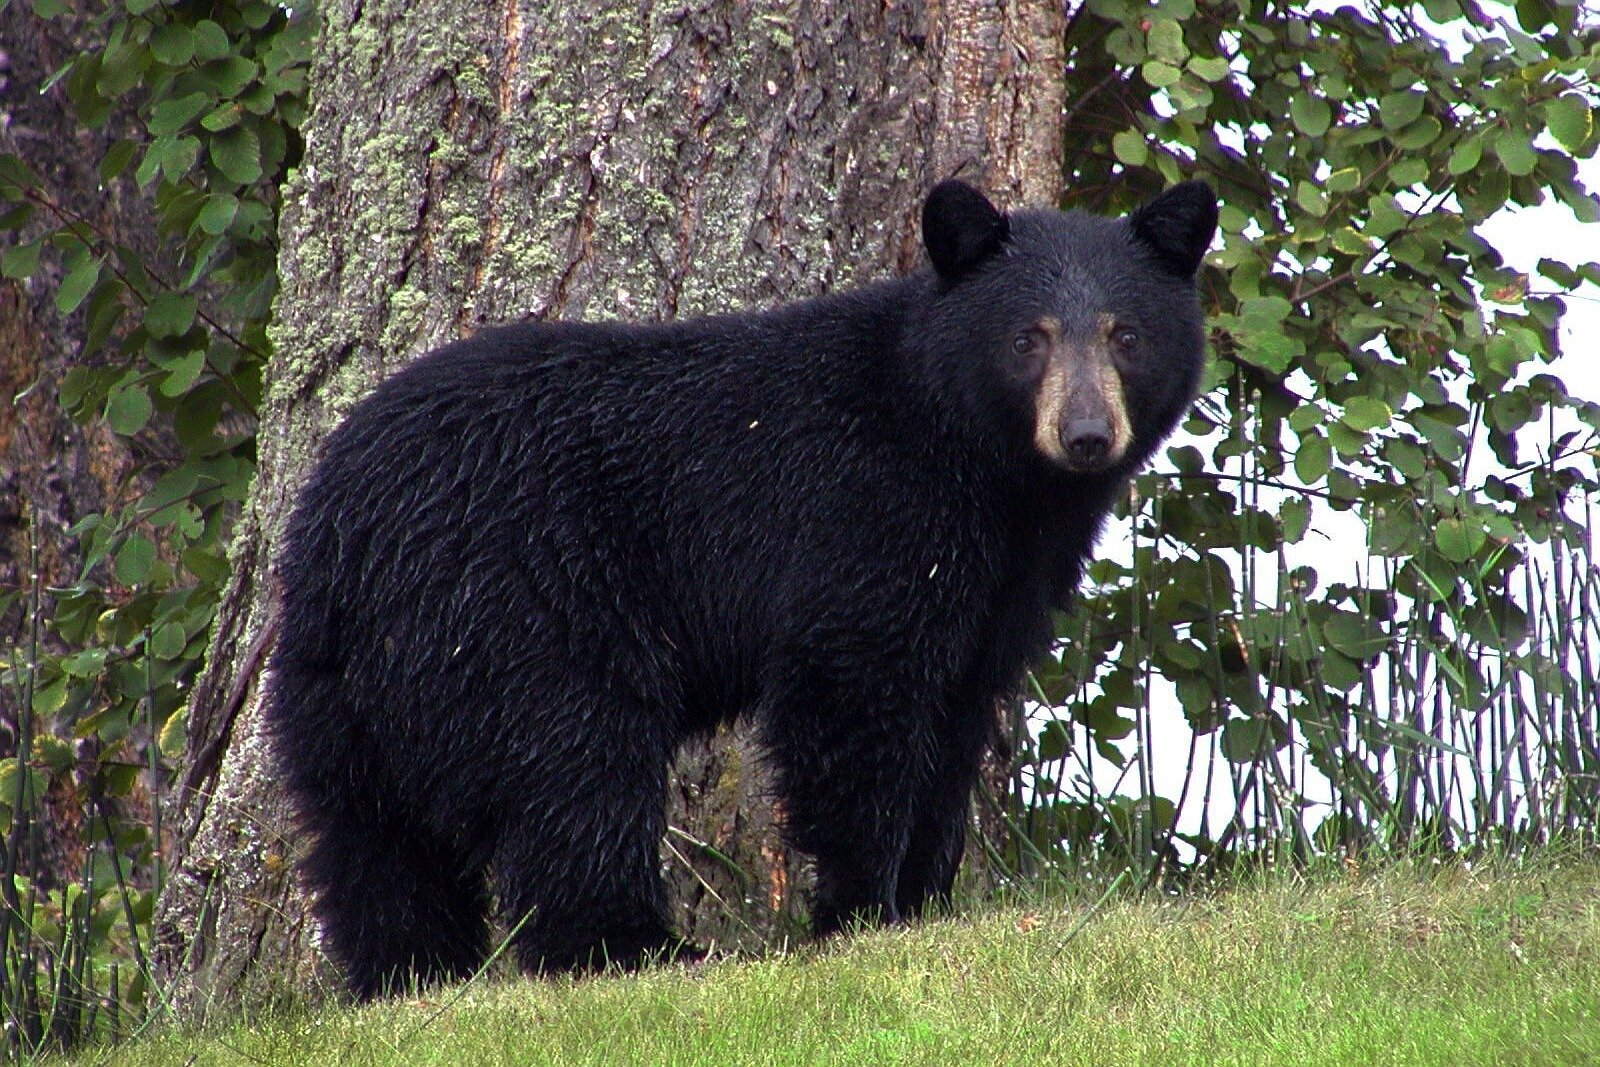 Florida's black bears remain offlimits from hunters, but only for now